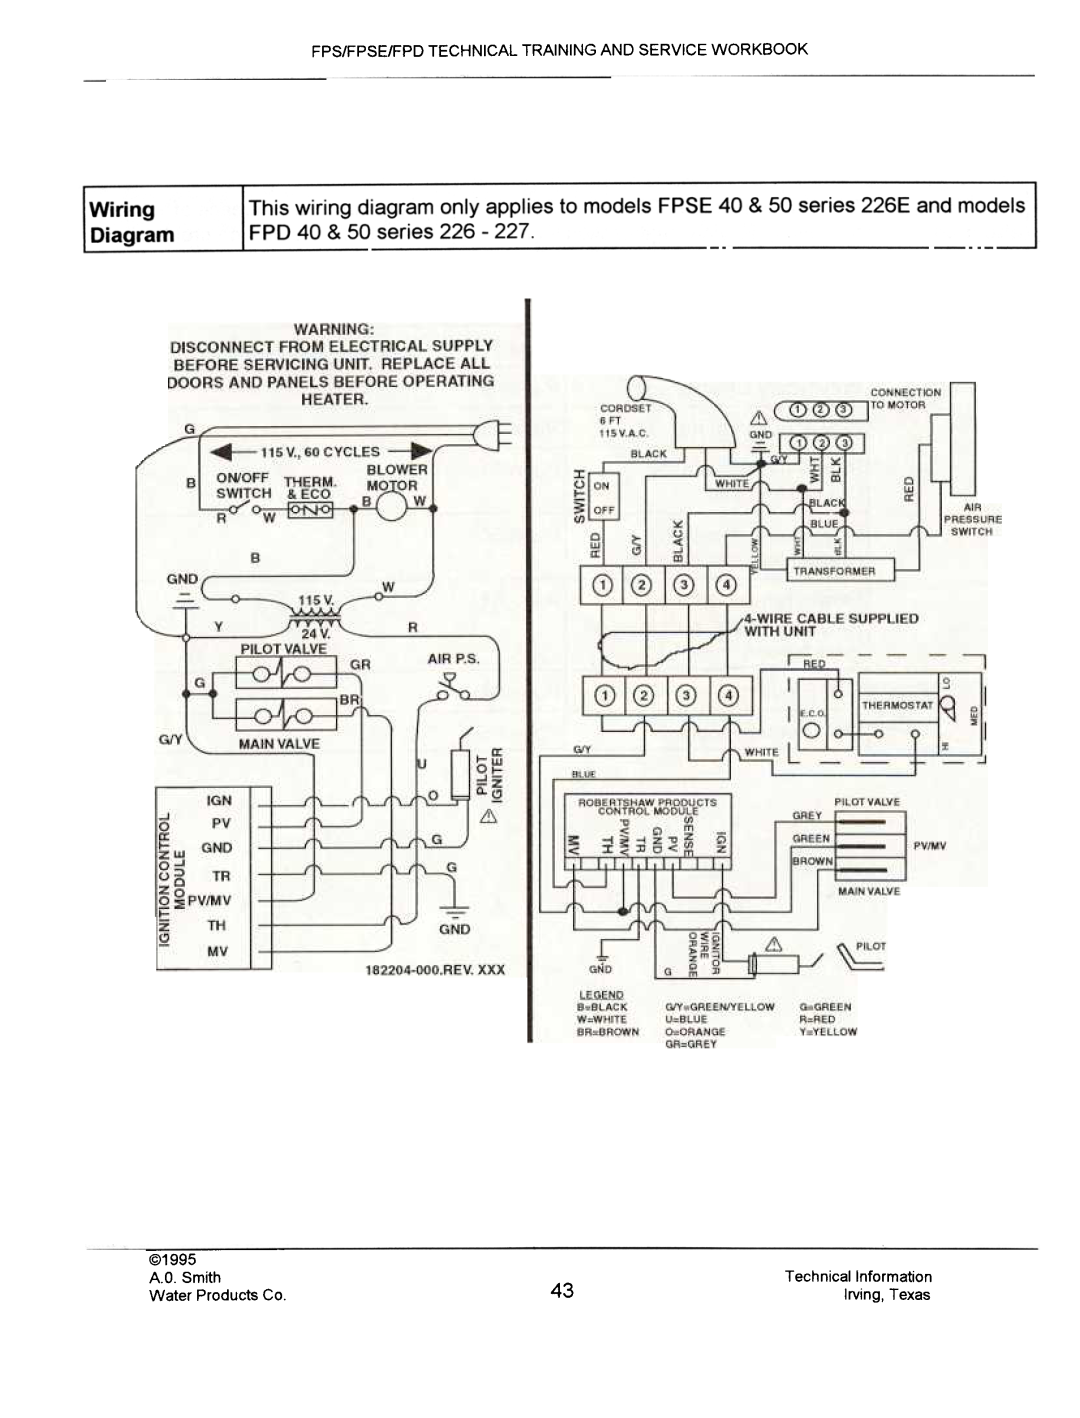 A.O. Smith FPSE50, fps50 Fps/Fpse/Fpd Technical Training And Service Workbook, @1995, Technical Information, A.D. Smith 